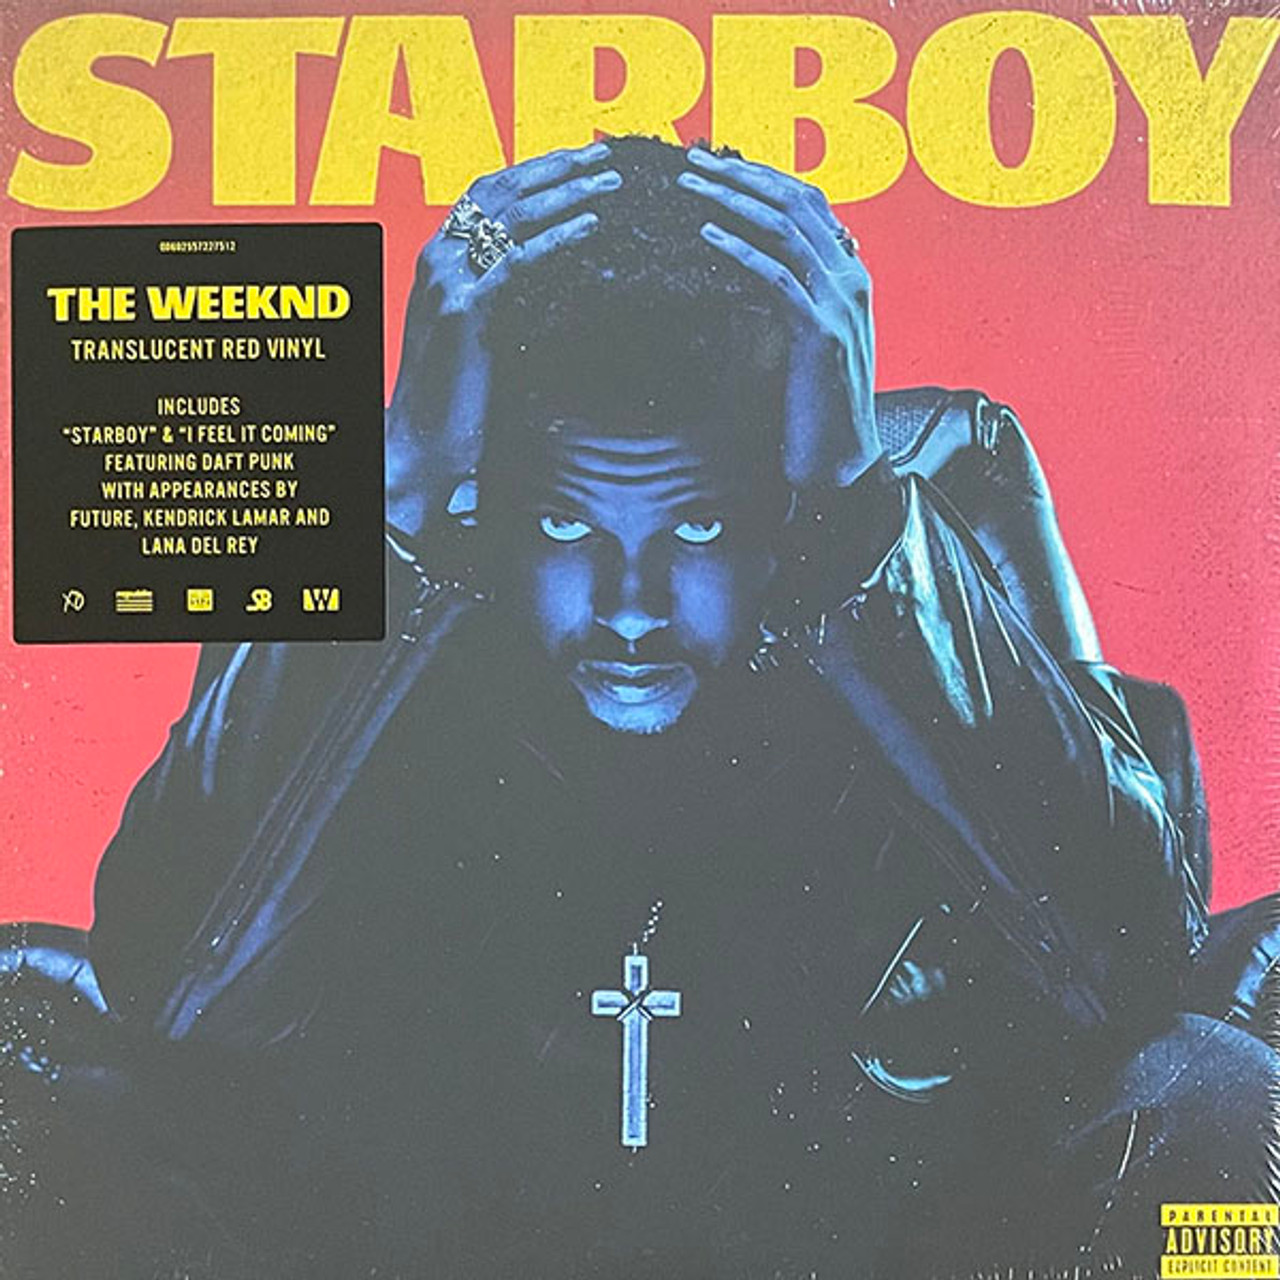 The Weeknd - Starboy (2LP) - Translucent Red Vinyl Record